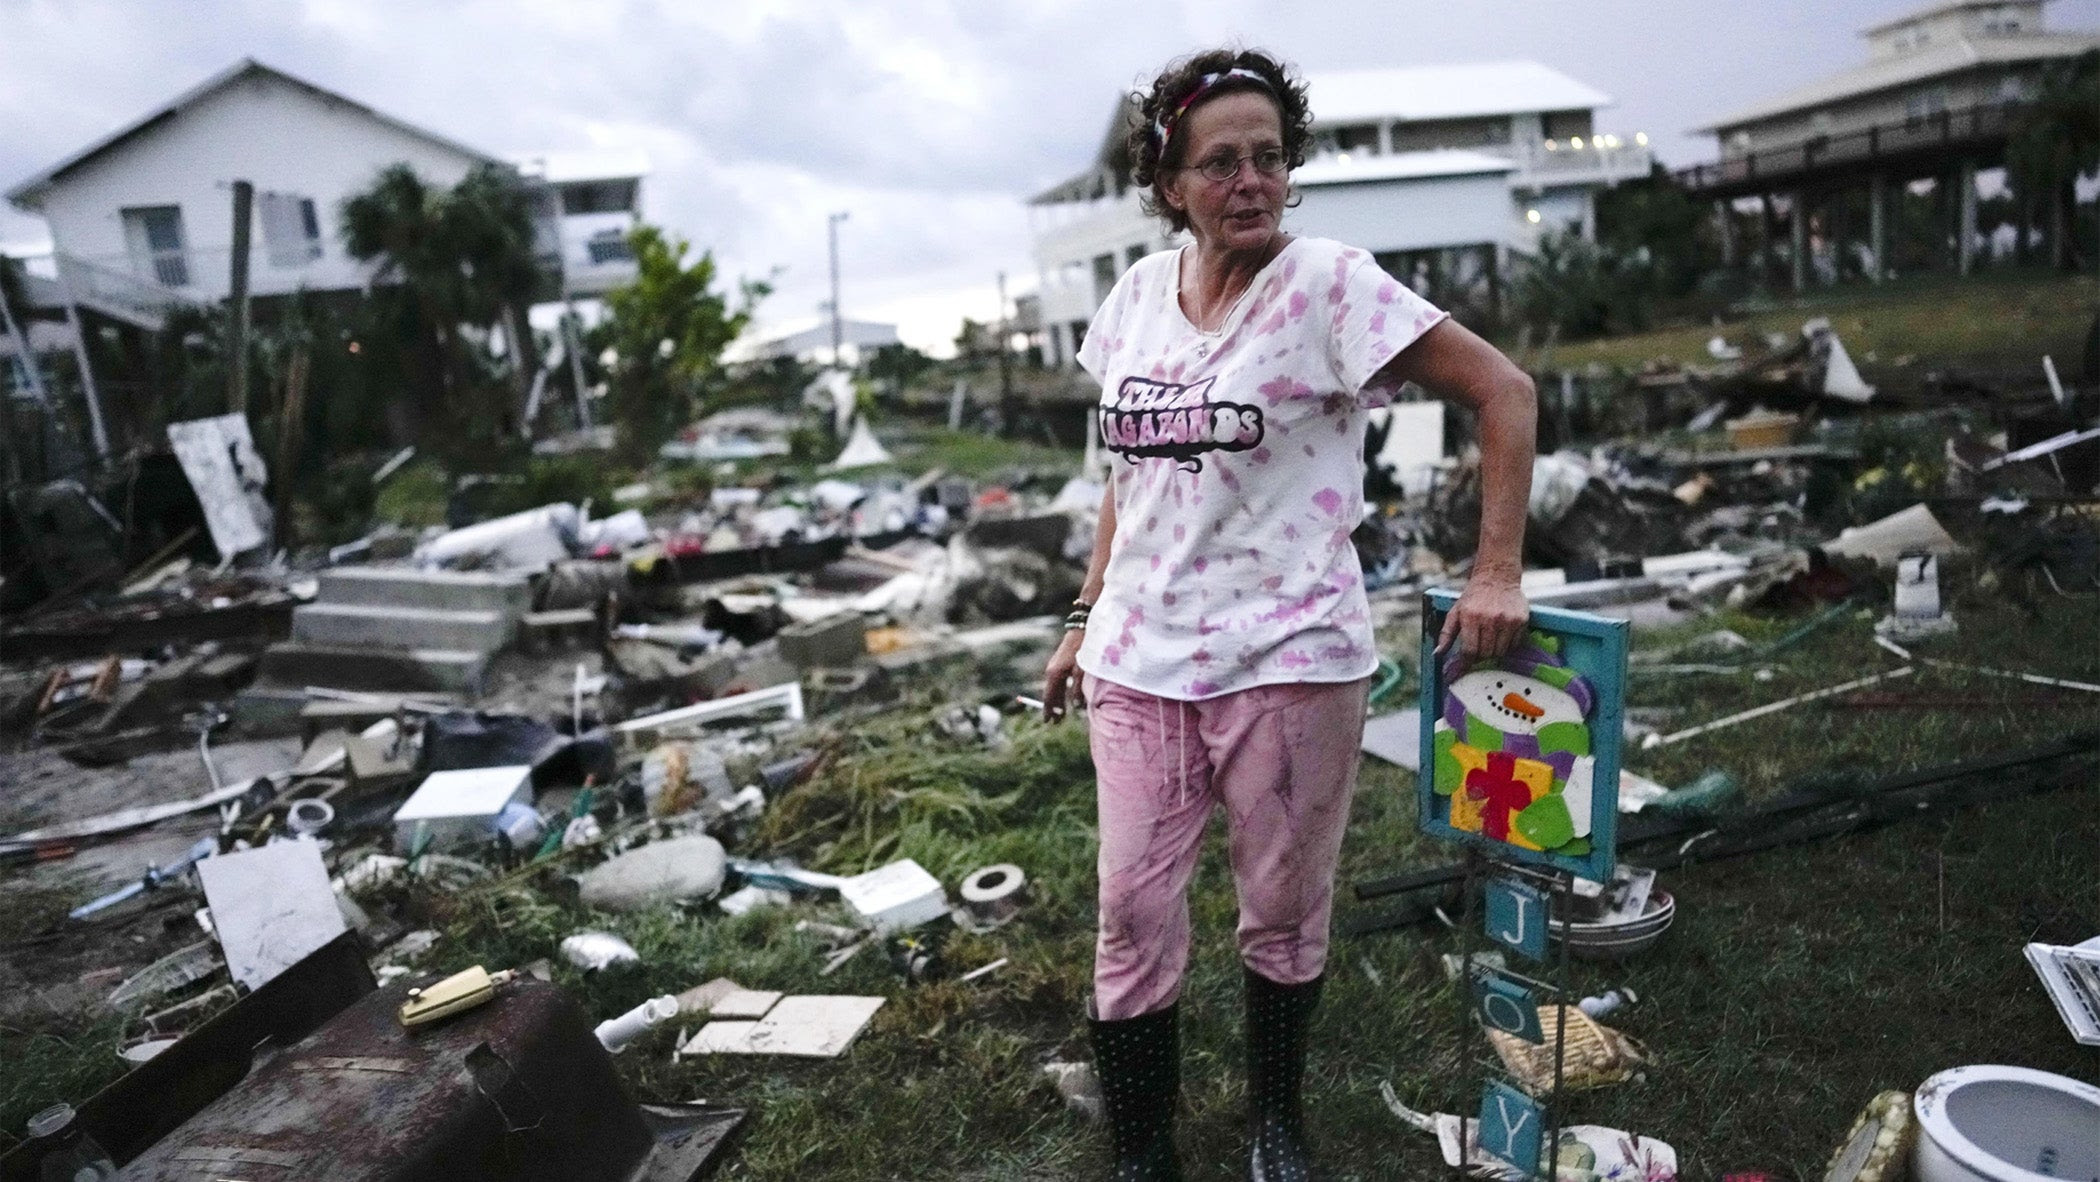 a woman stands in the wreckage, holding a Christmas decoration